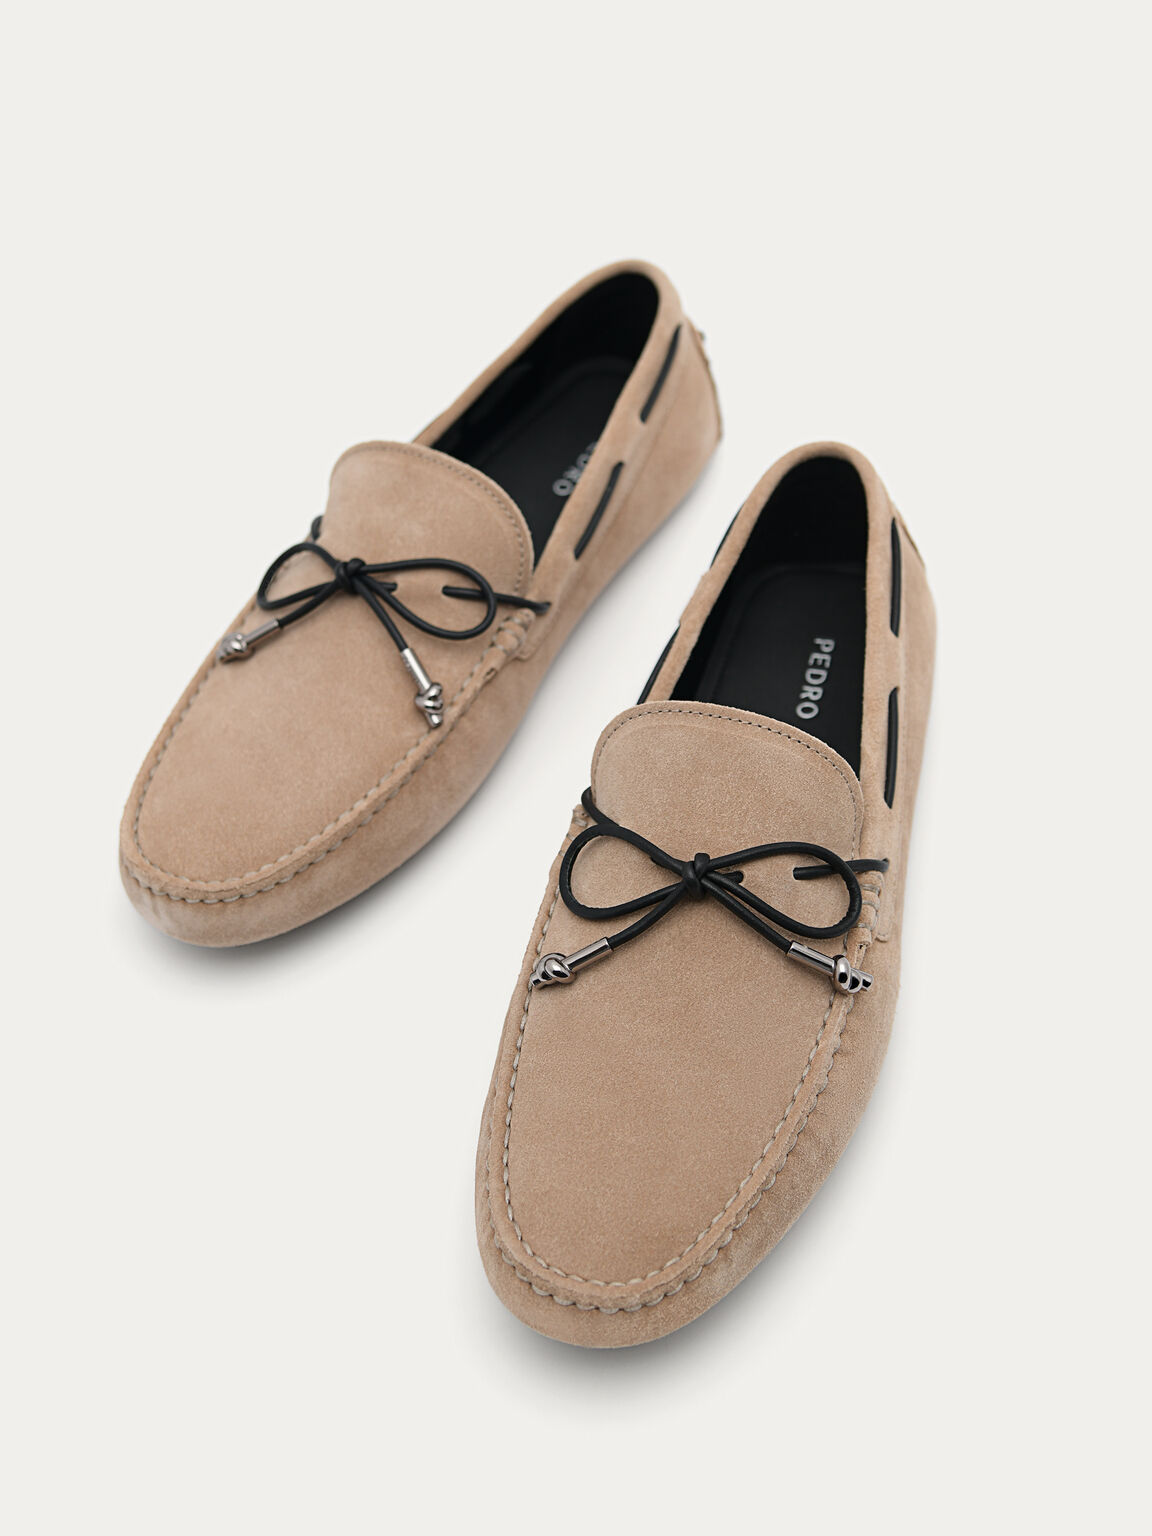 Suede Moccasins with Metal-dipped Laces, Sand